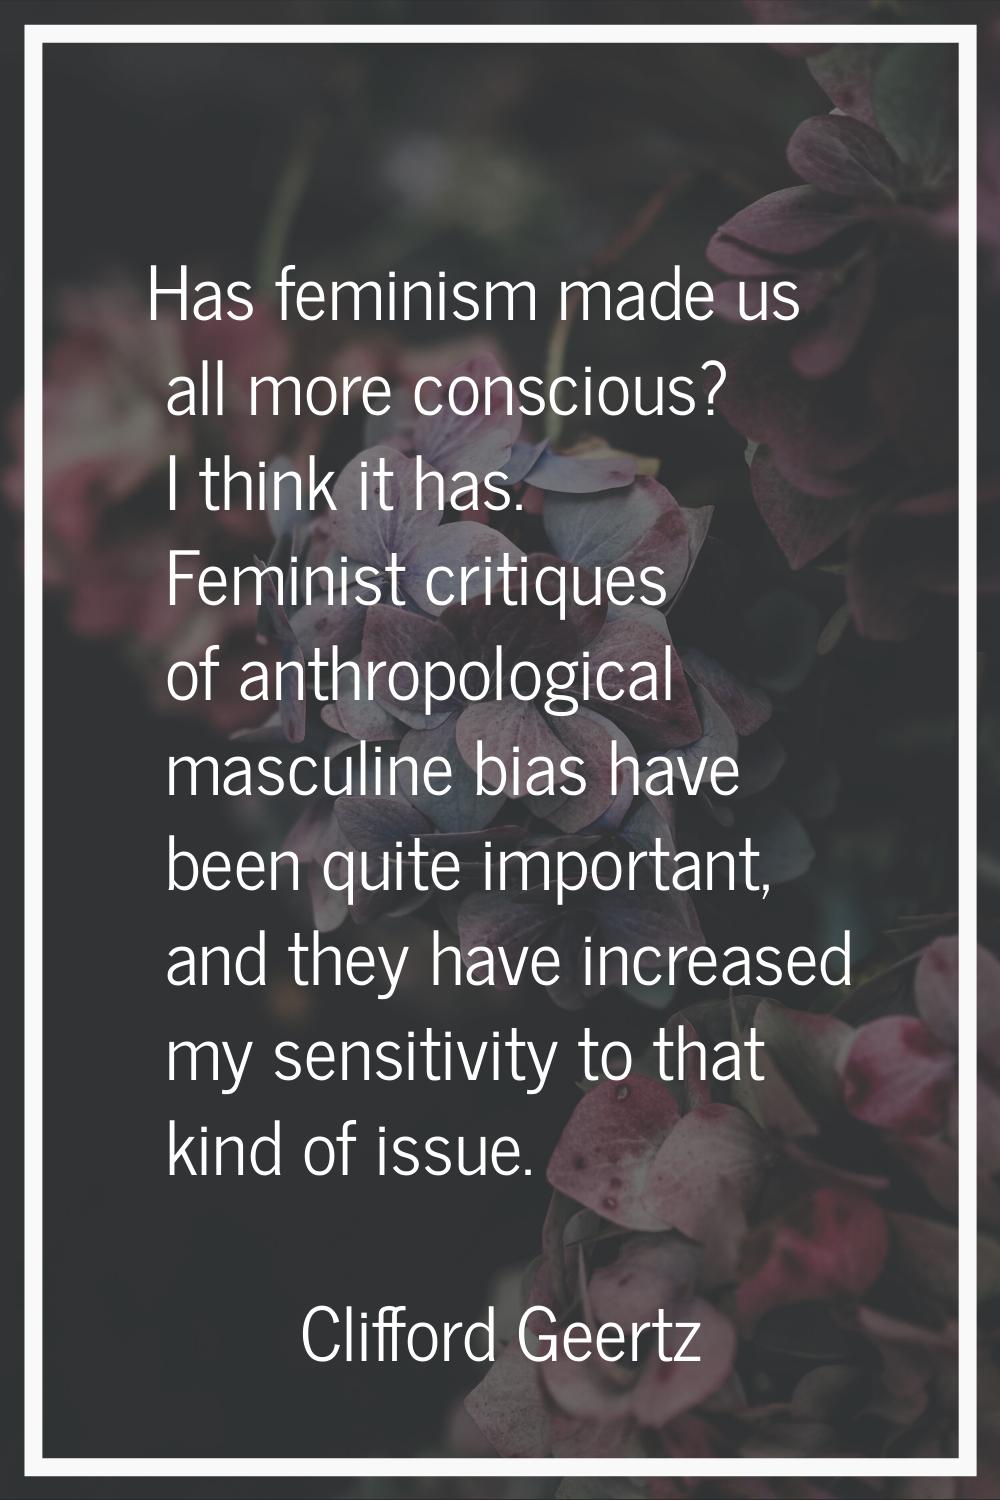 Has feminism made us all more conscious? I think it has. Feminist critiques of anthropological masc